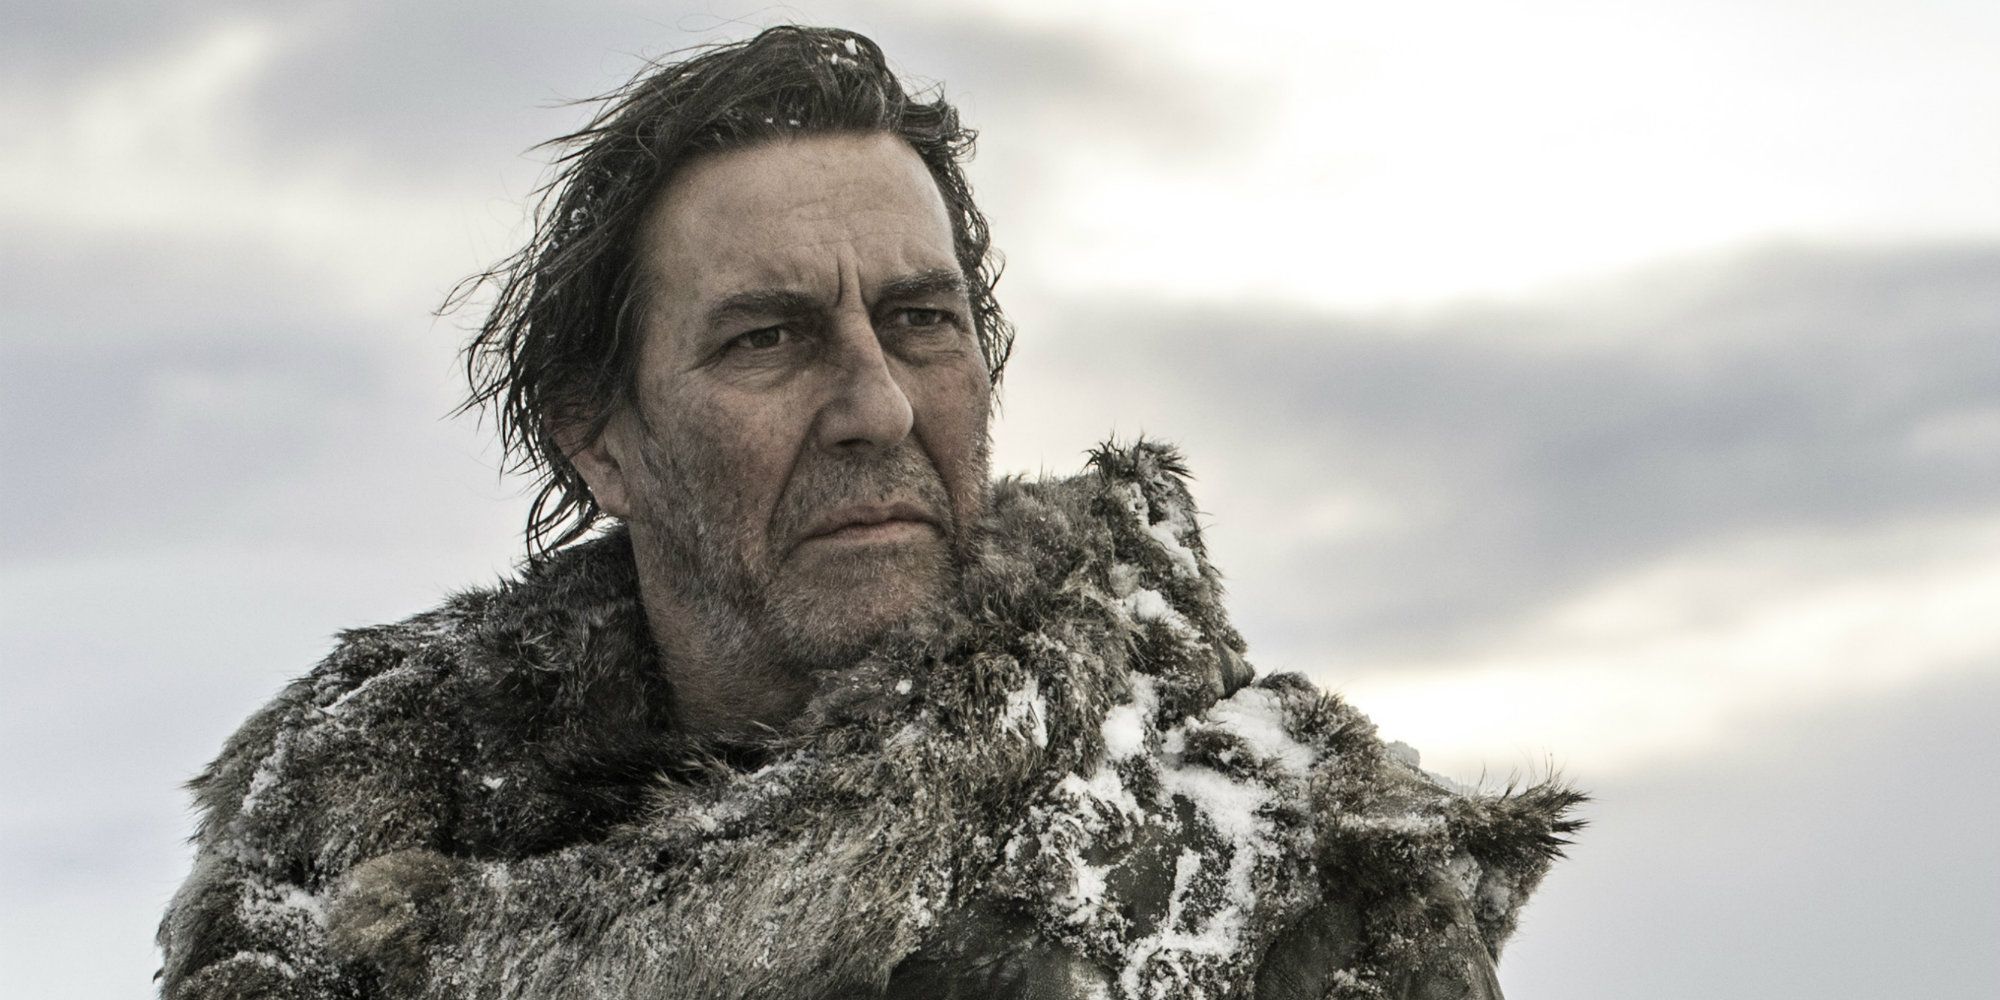 Mance Rayder in Game of Thrones 